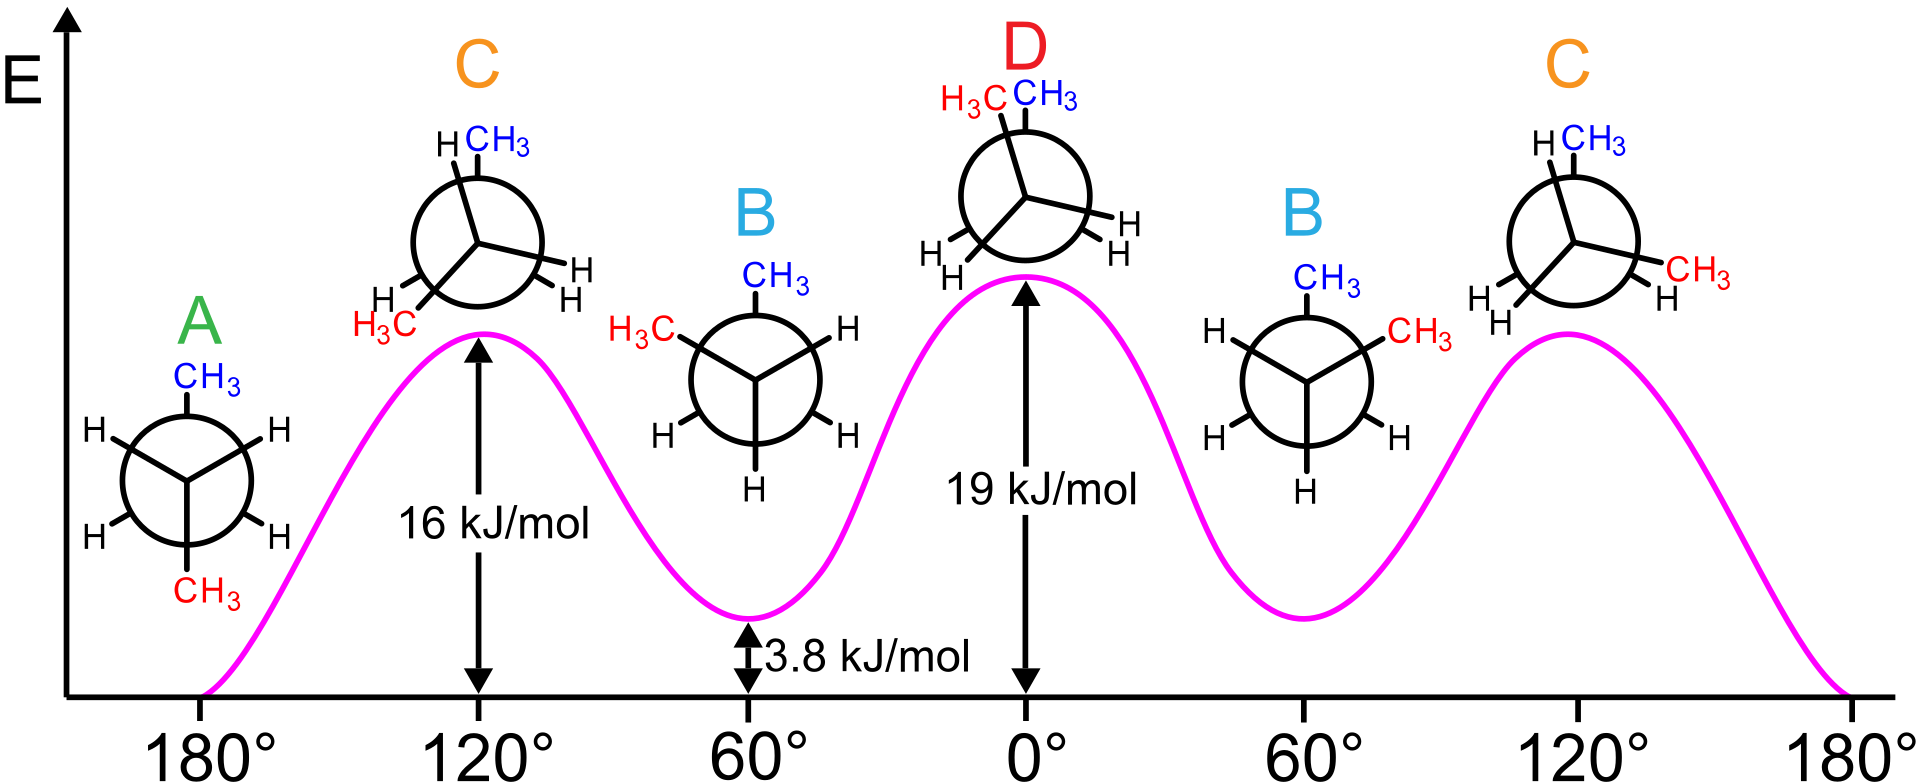 1920px-Butane_conformations_and_relative_energies.svg.png